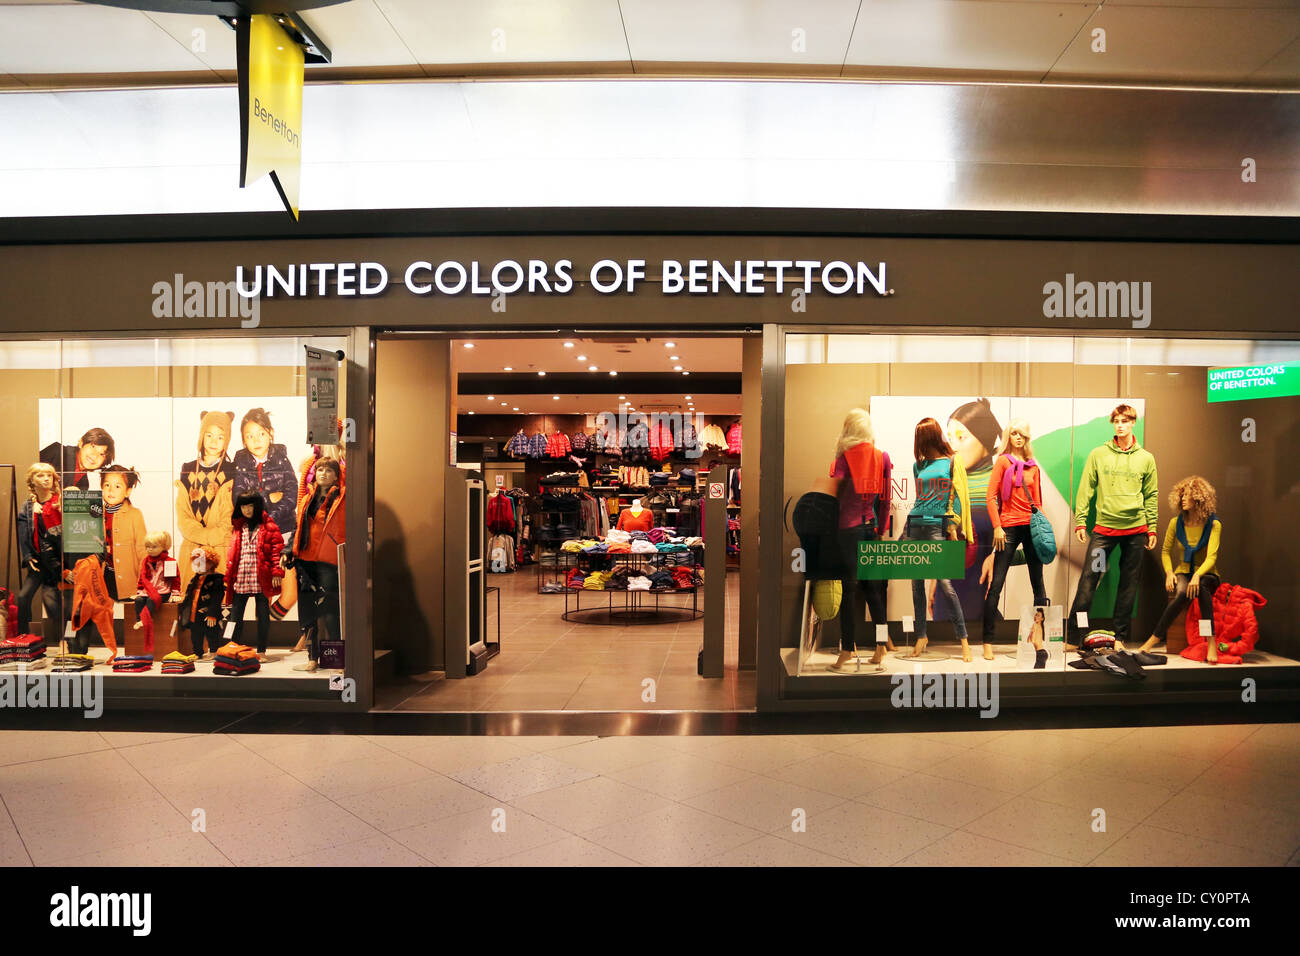 United Colours Of Benetton Shop High Resolution Stock Photography and  Images - Alamy